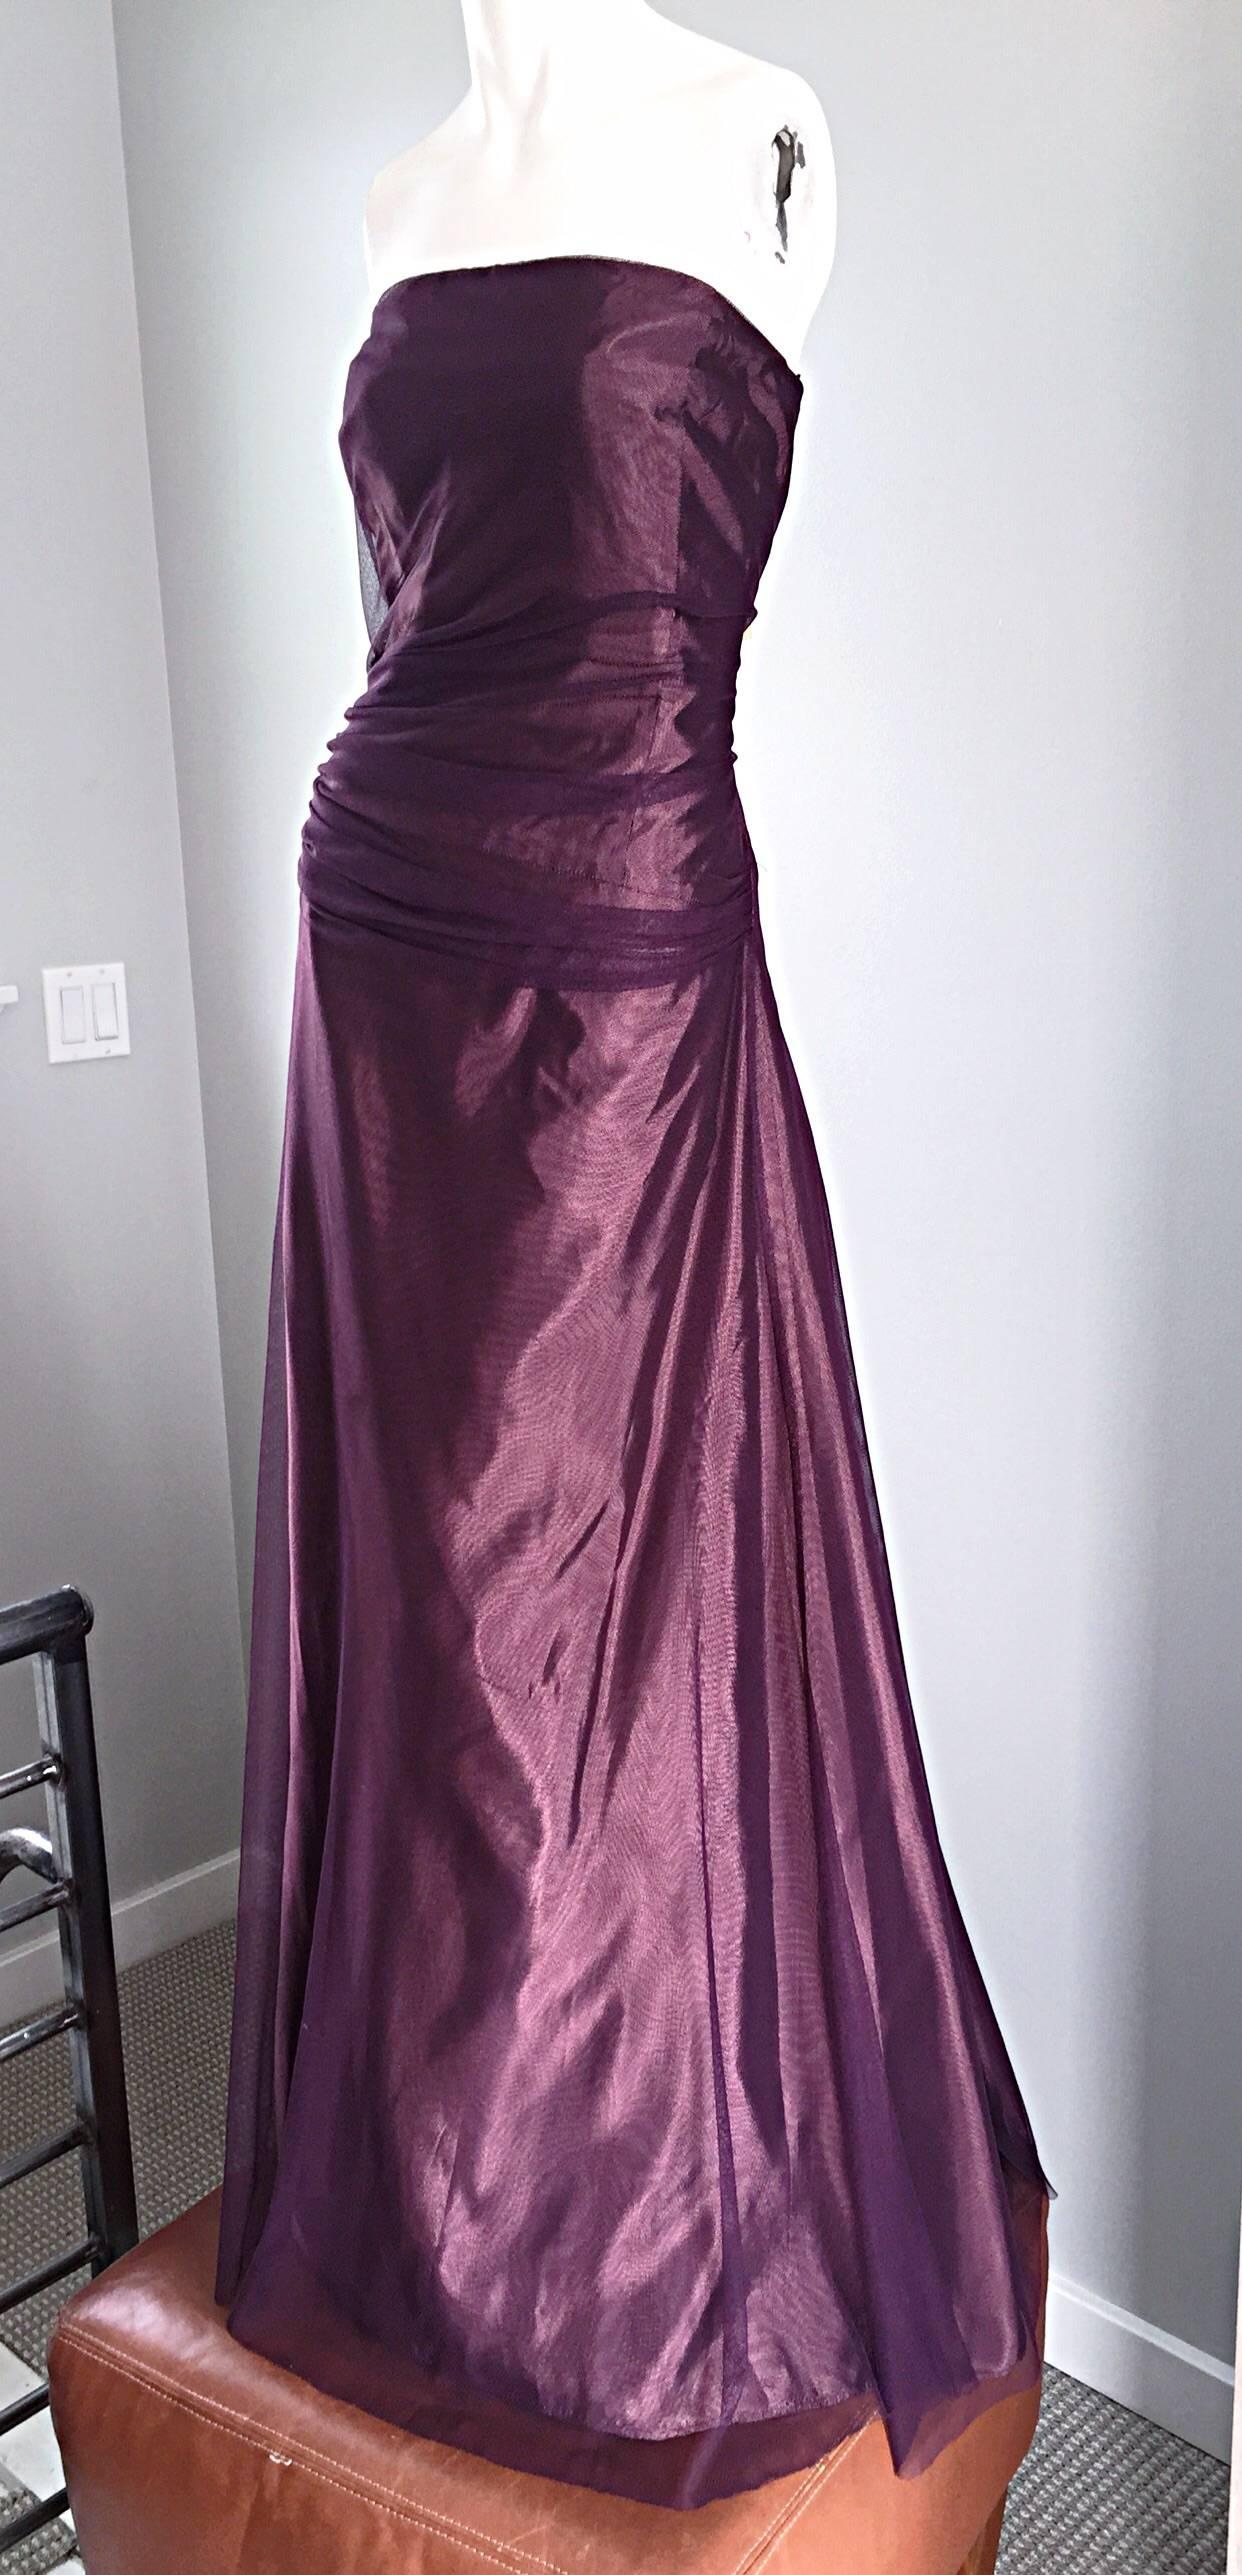 Stunning Vera Wang purple / eggplant Taffetta evening ball gown! From the early to mid 1990s. Extremely flattering to the shape. Layers and layers of tulle over taffeta. Ruching at waist makes for an extra slimming effect. This strapless gown is